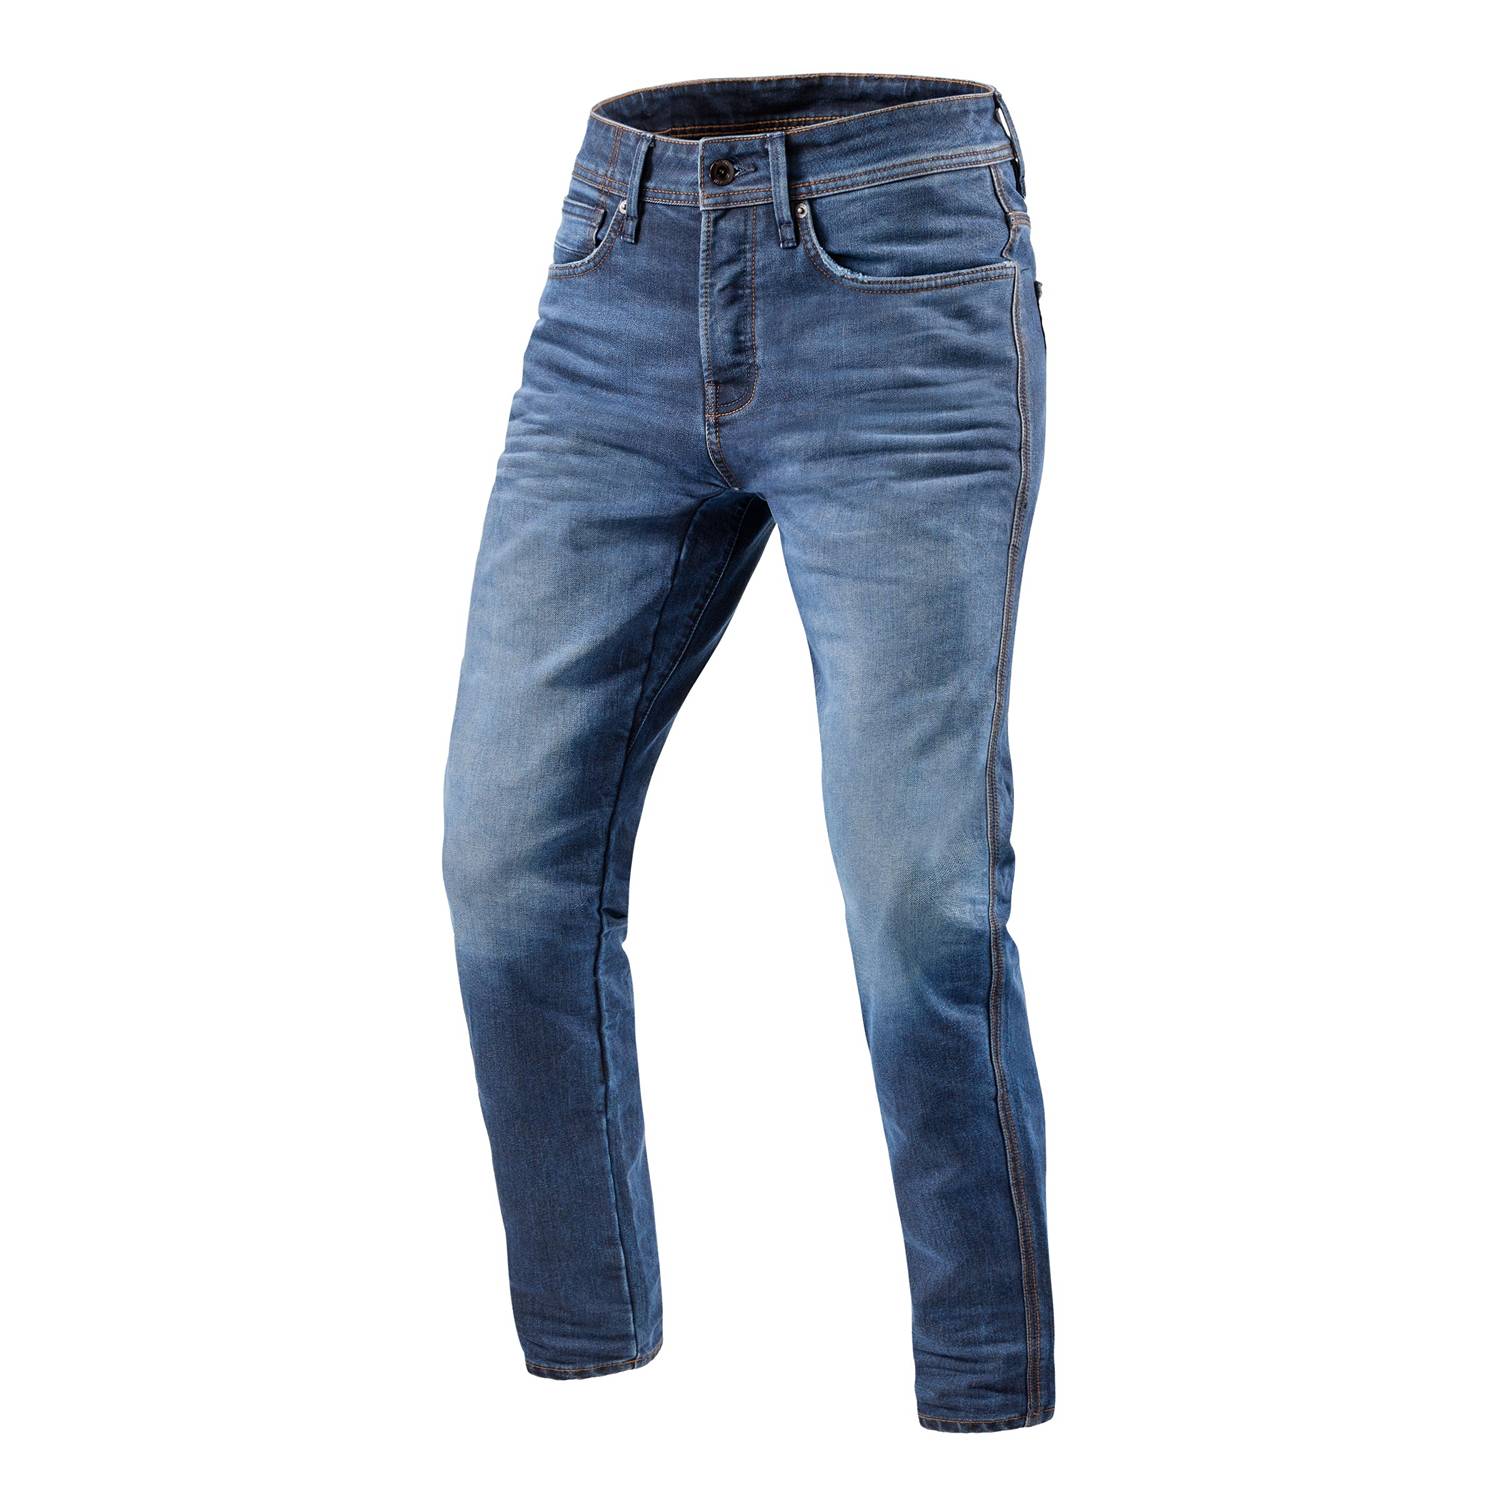 Image of REV'IT! Jeans Reed SF Mid Blue Used Motorcycle Jeans Size L36/W31 ID 8700001337342